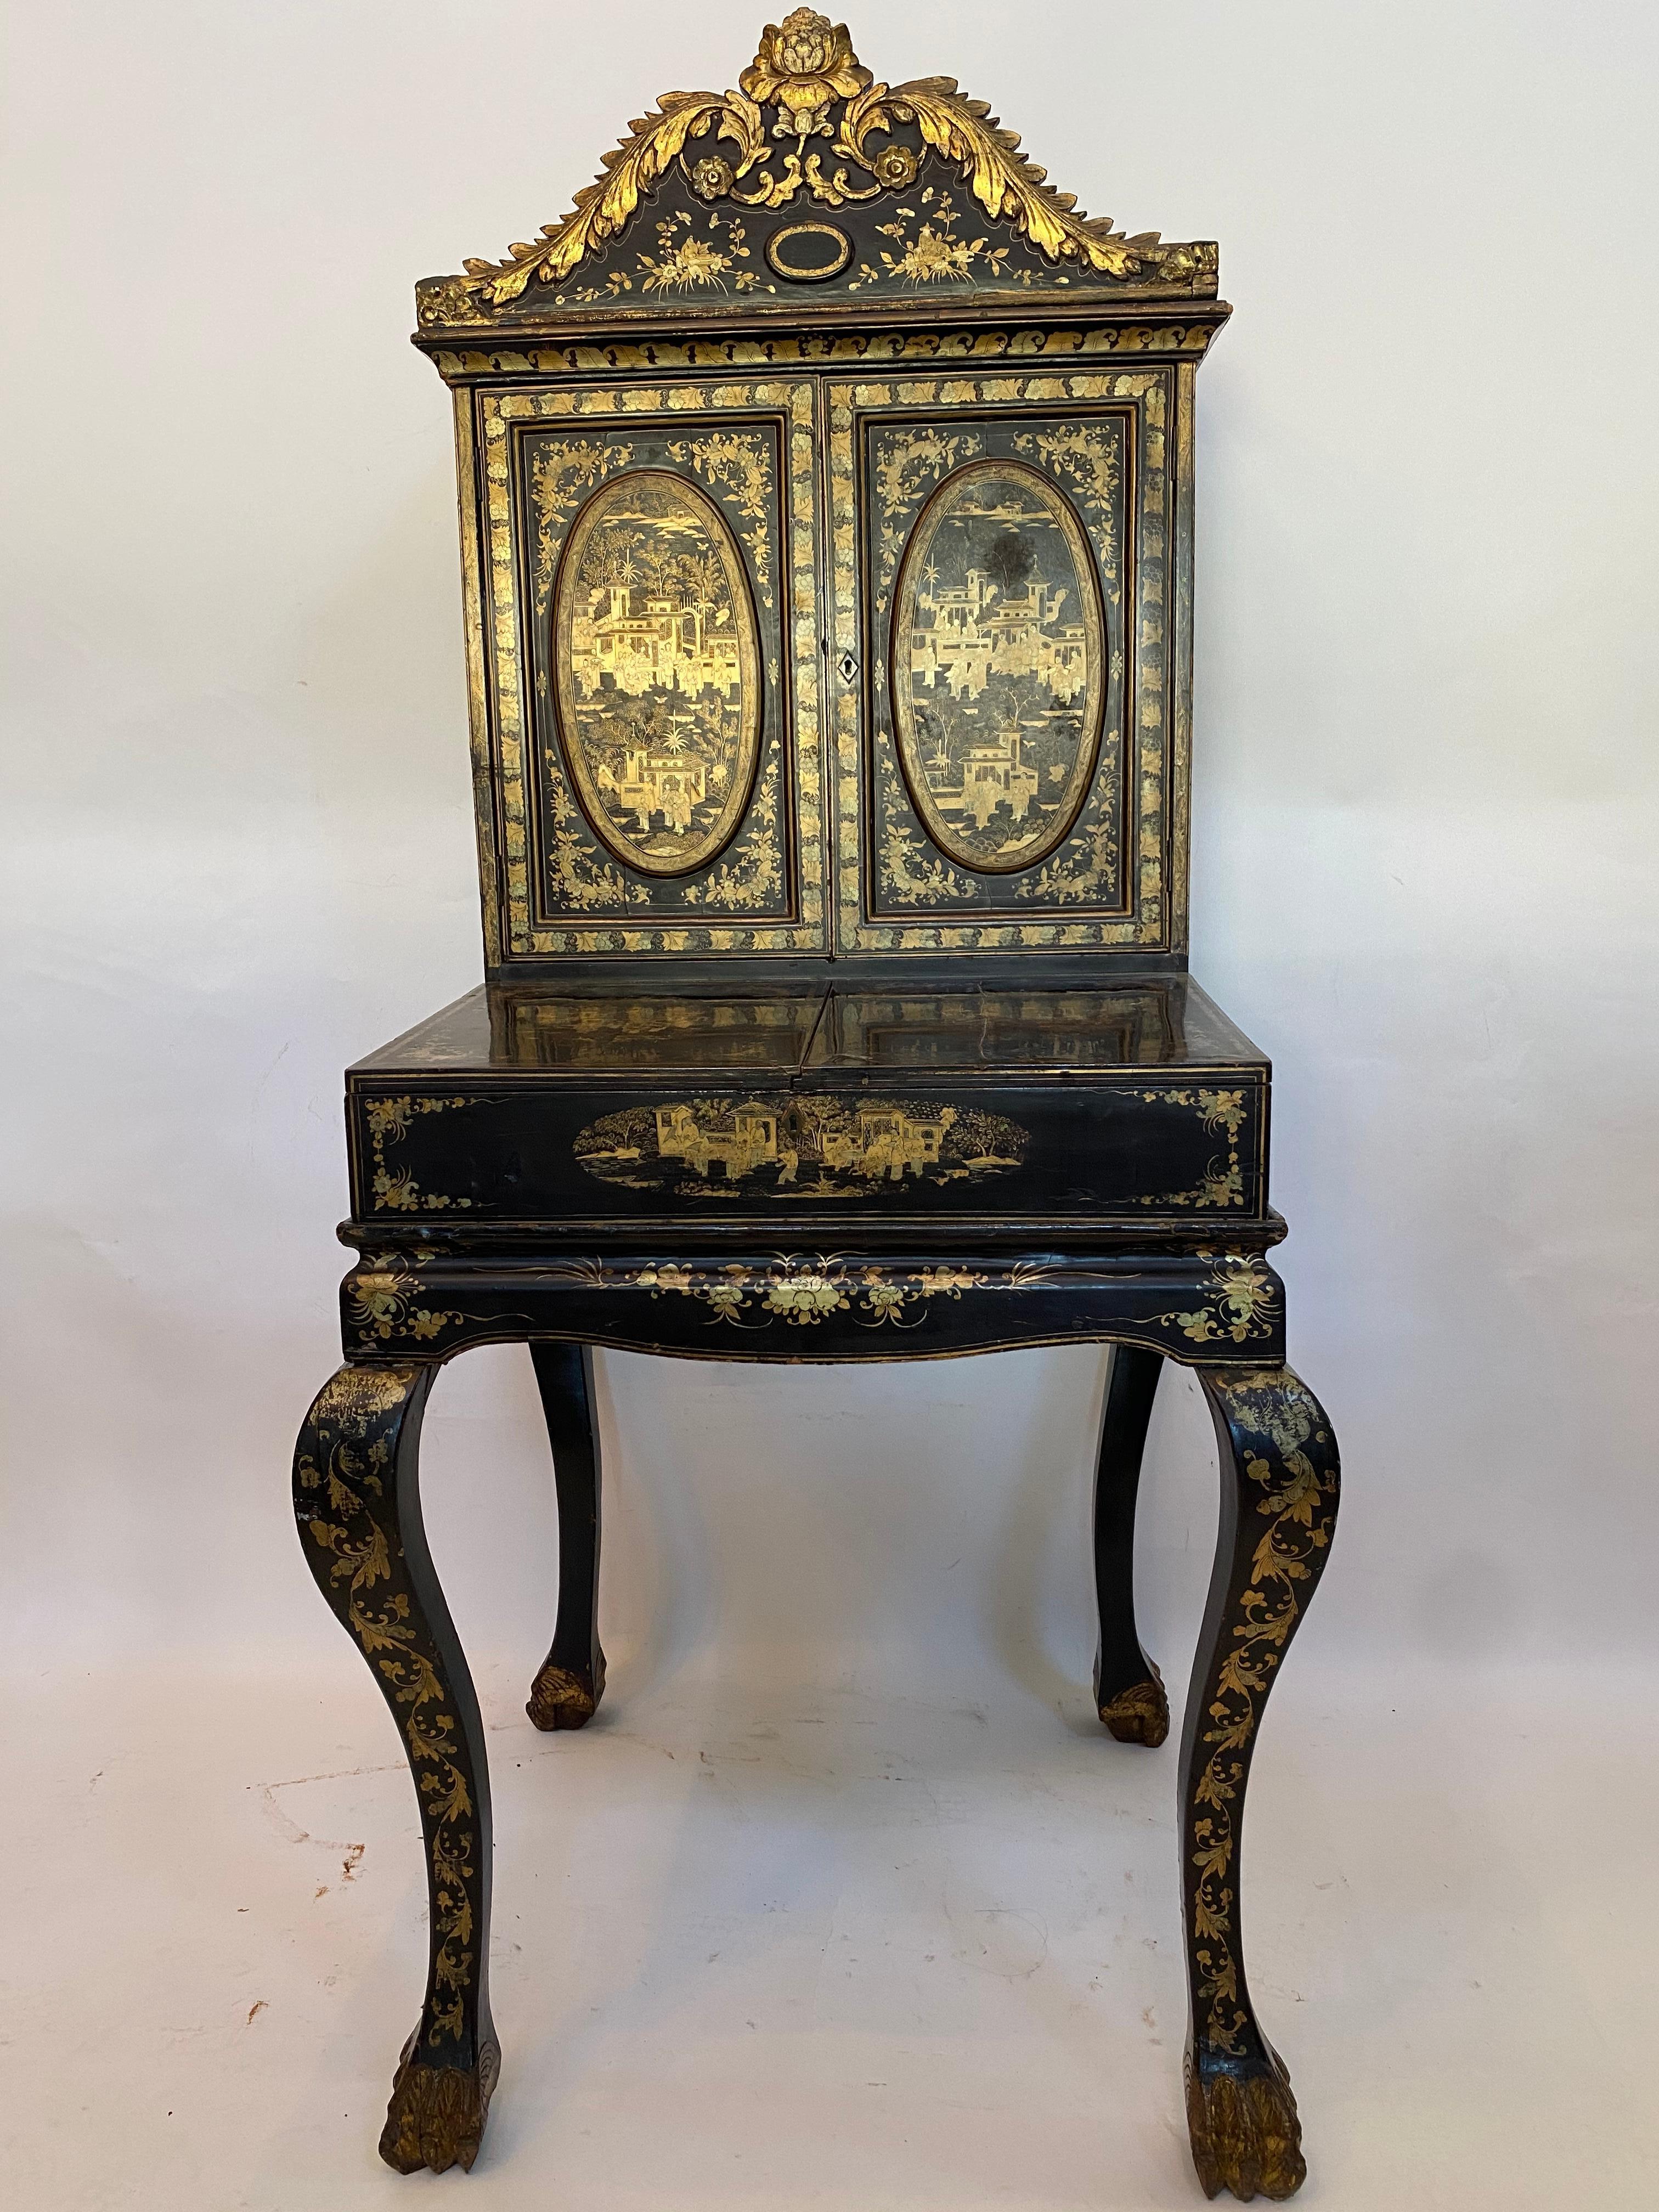 18th century gilt black lacquer Chinese cabinet desk, the rectangular-section body decorated with panels of landscapes, the superstructure of two panelled doors, enclosing an array of small drawers and a mirror panelled door. The projecting base